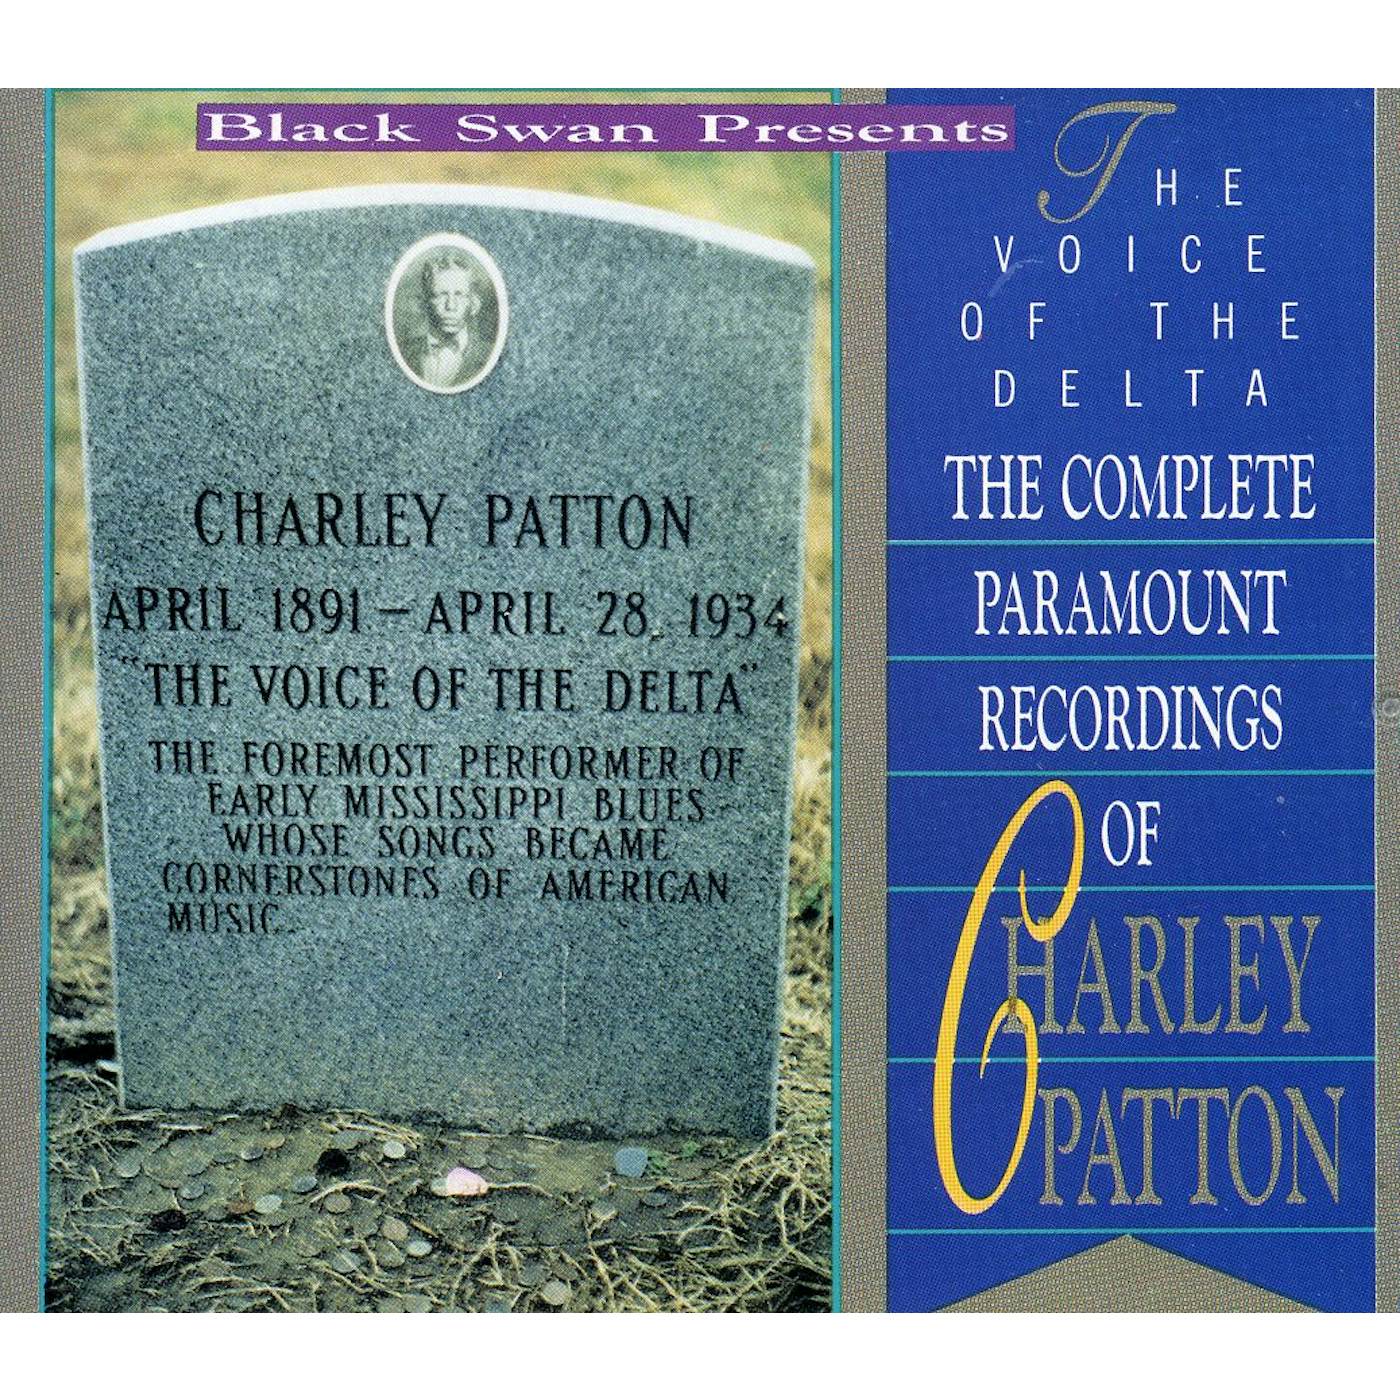 Charley Patton VOICE OF THE DELTA CD